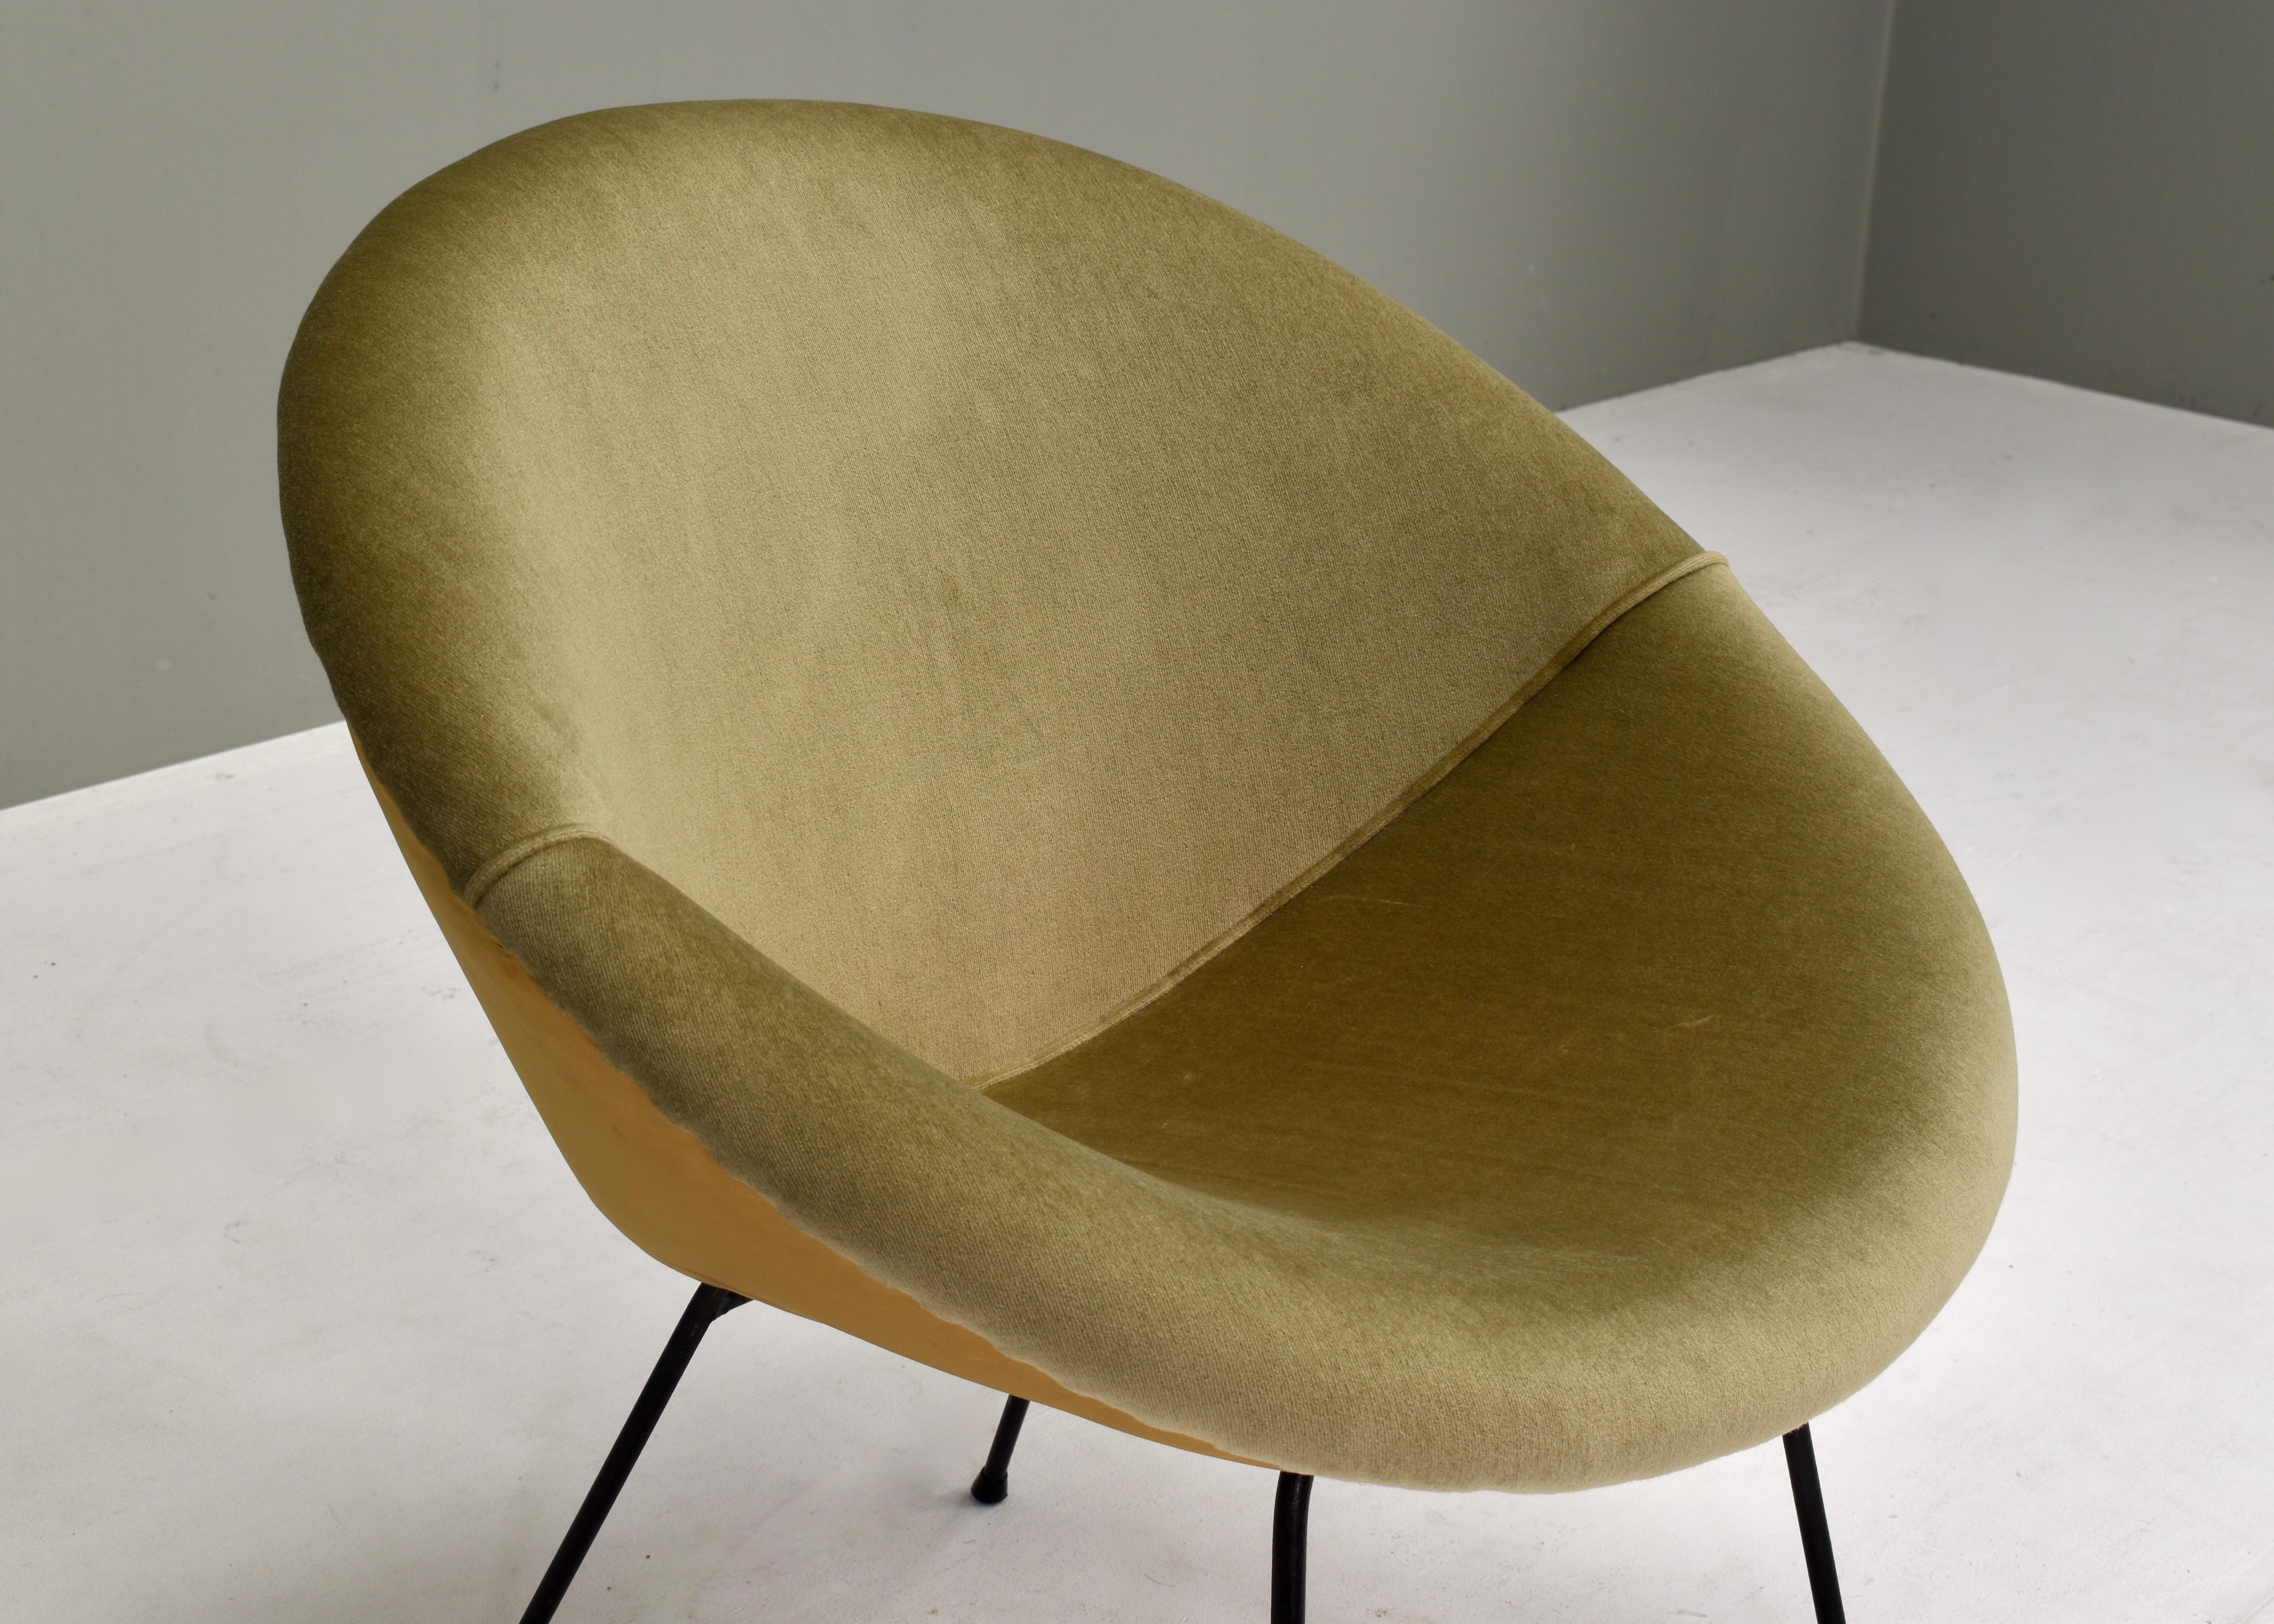 Sculptural Circle Chair in Original Mohair Velvet and Black Metal Base, 1950's In Good Condition For Sale In Pijnacker, Zuid-Holland